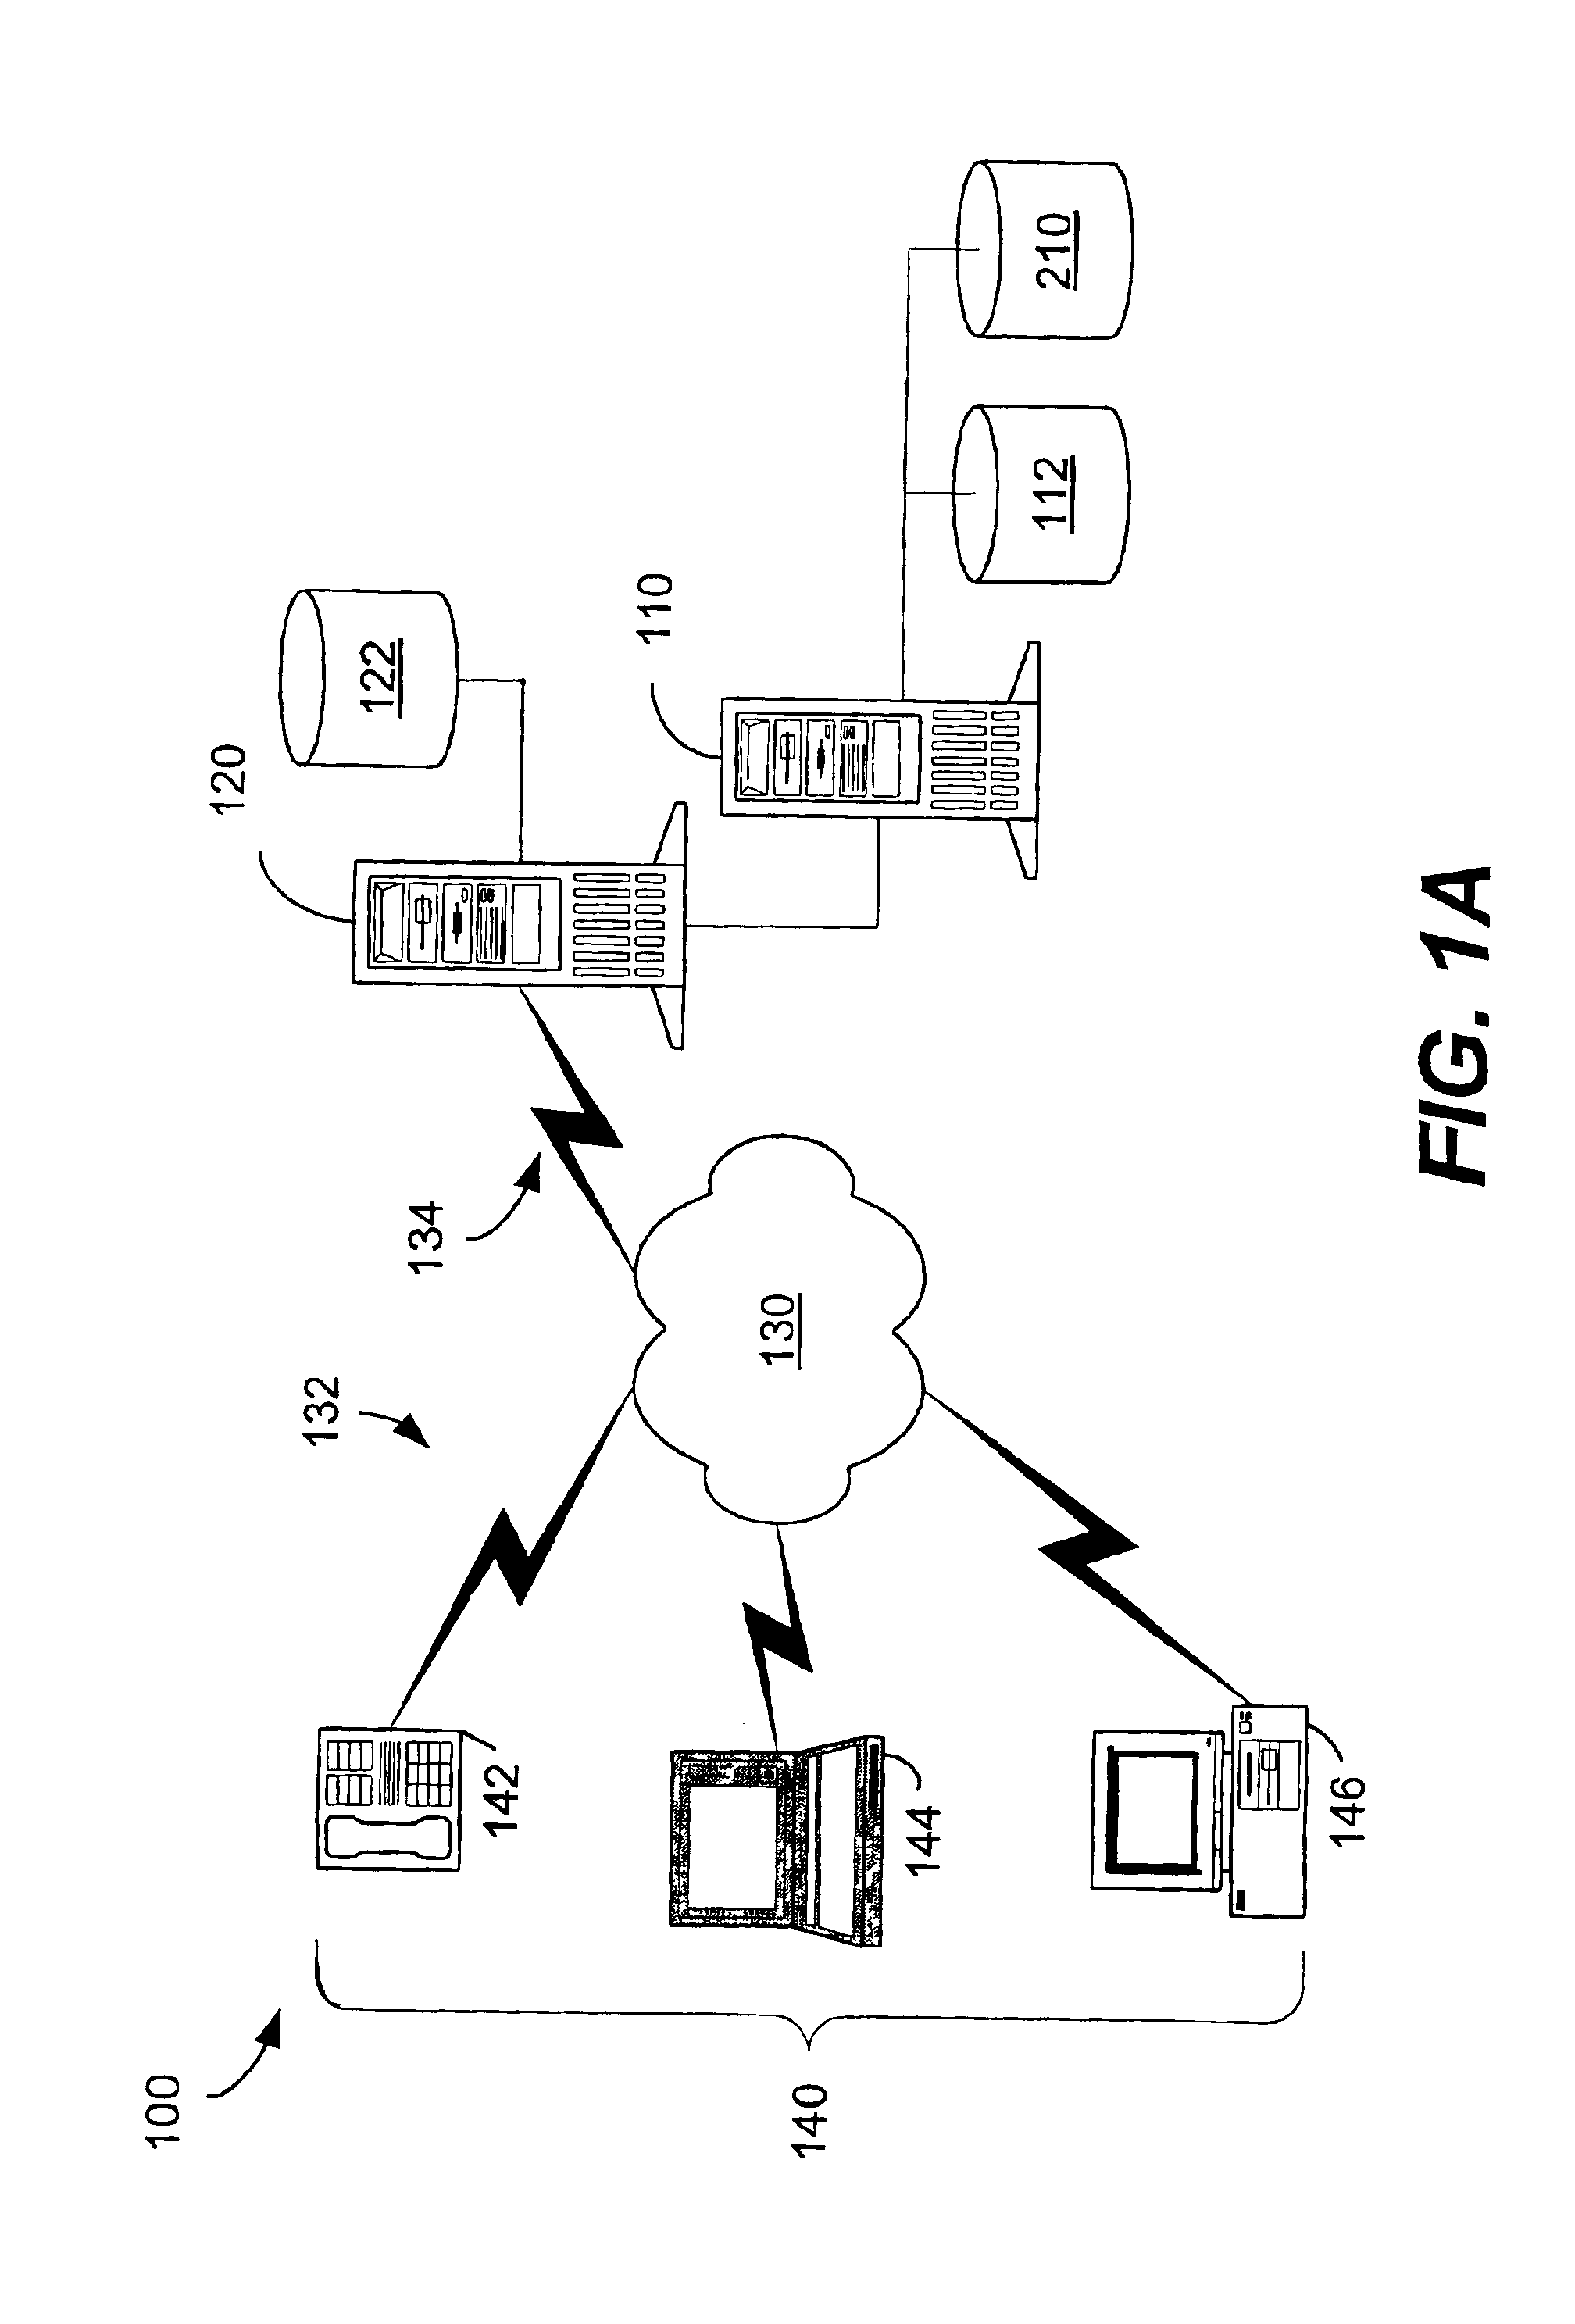 Phonetic data processing system and method